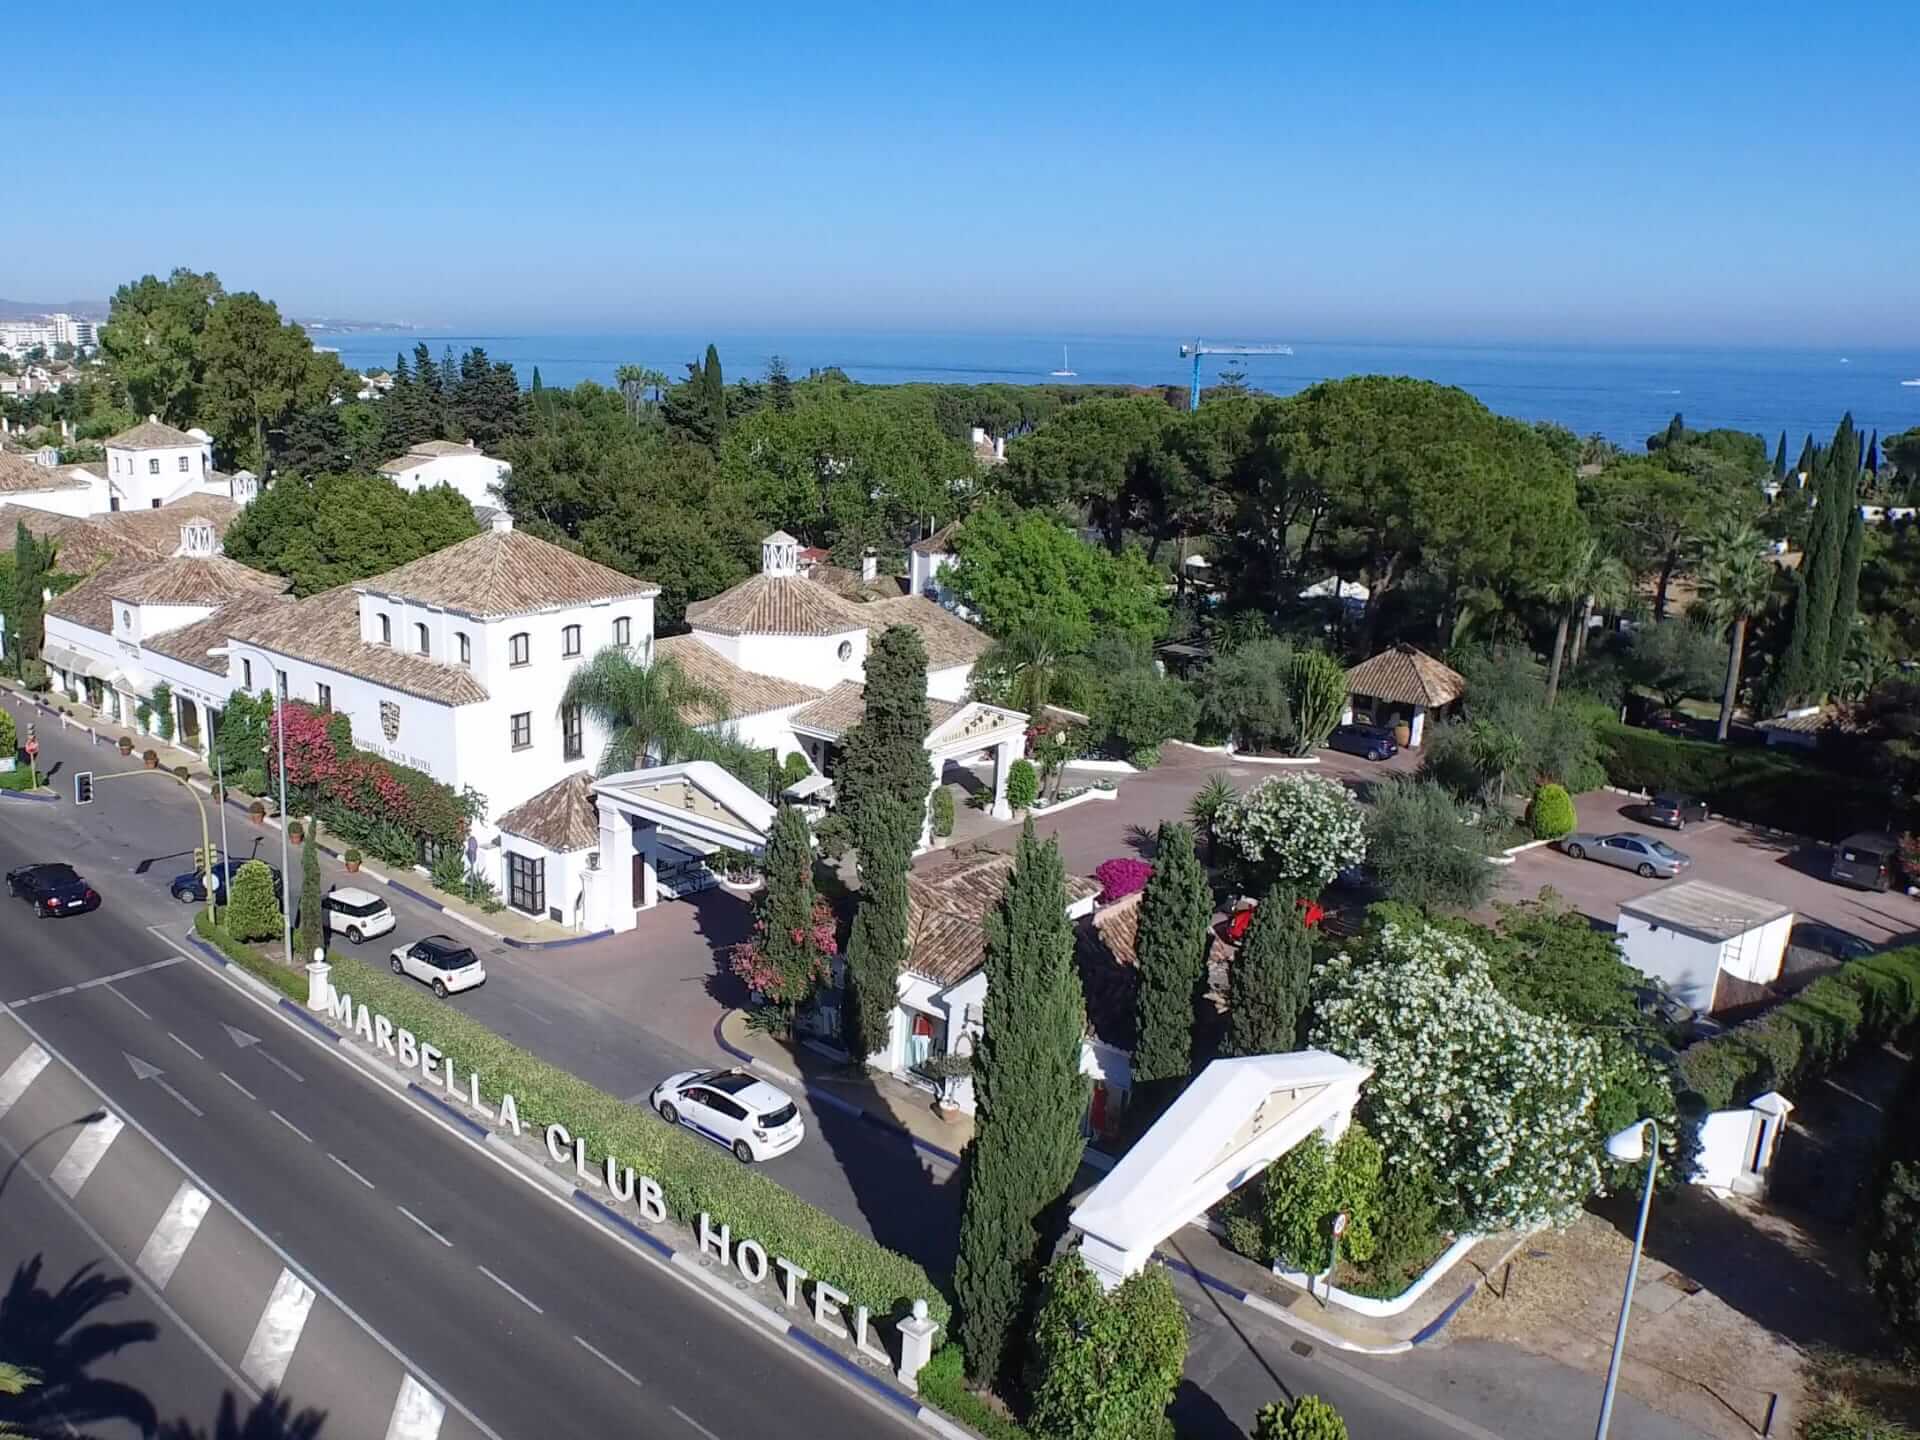 Richard Quest (CNN) has made the best article I have seen about Marbella & Costa del Sol.